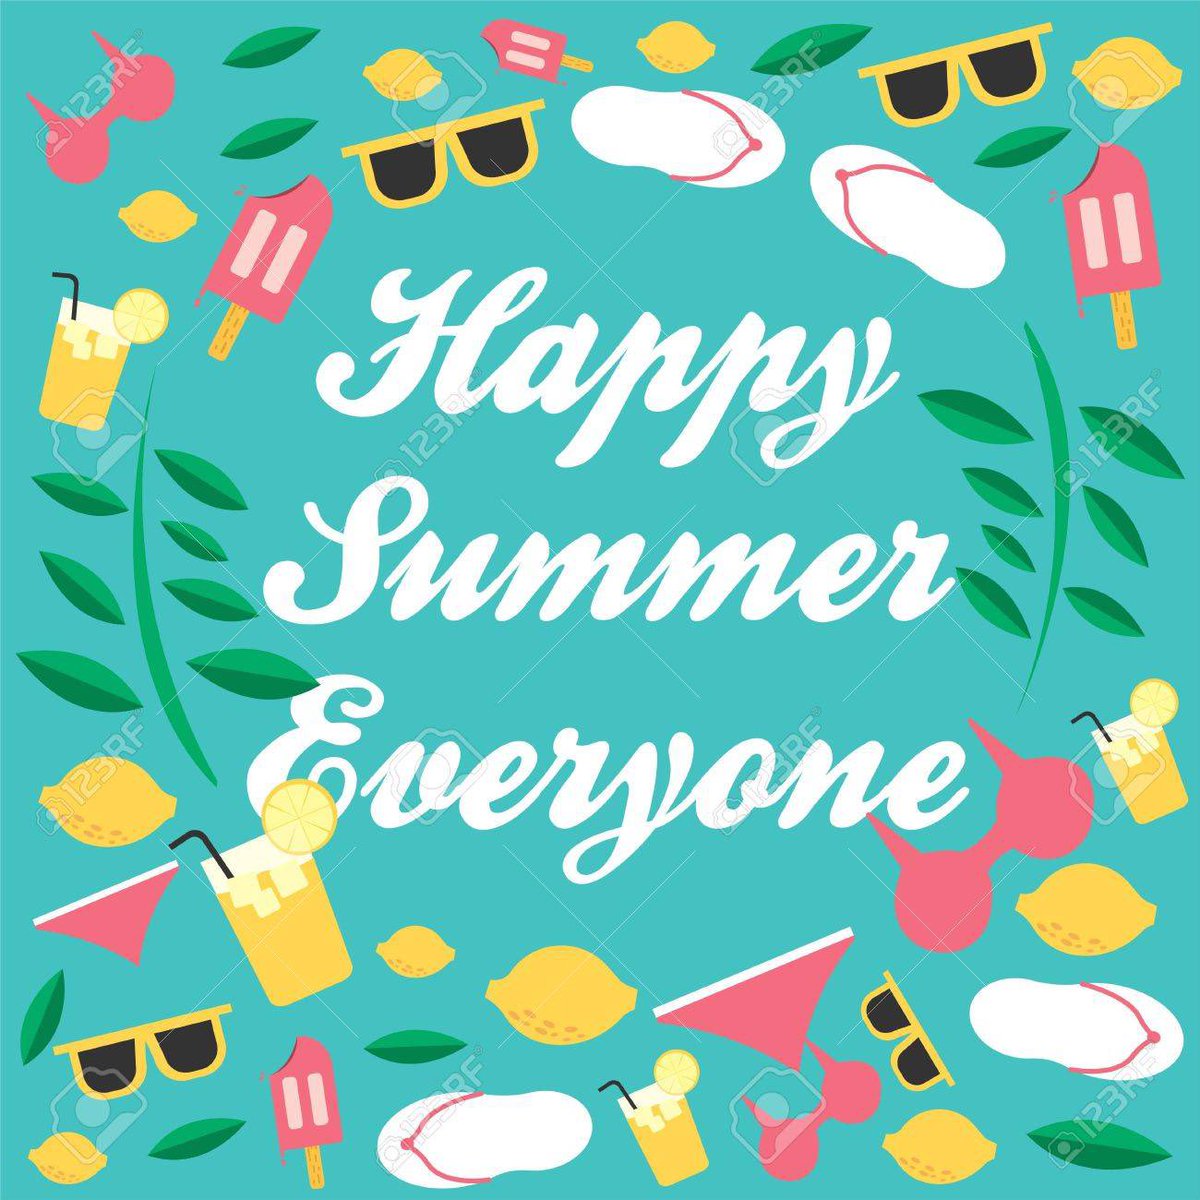 We wish to extend best wishes for a restful and enjoyable summer to all our St. Patrick families.